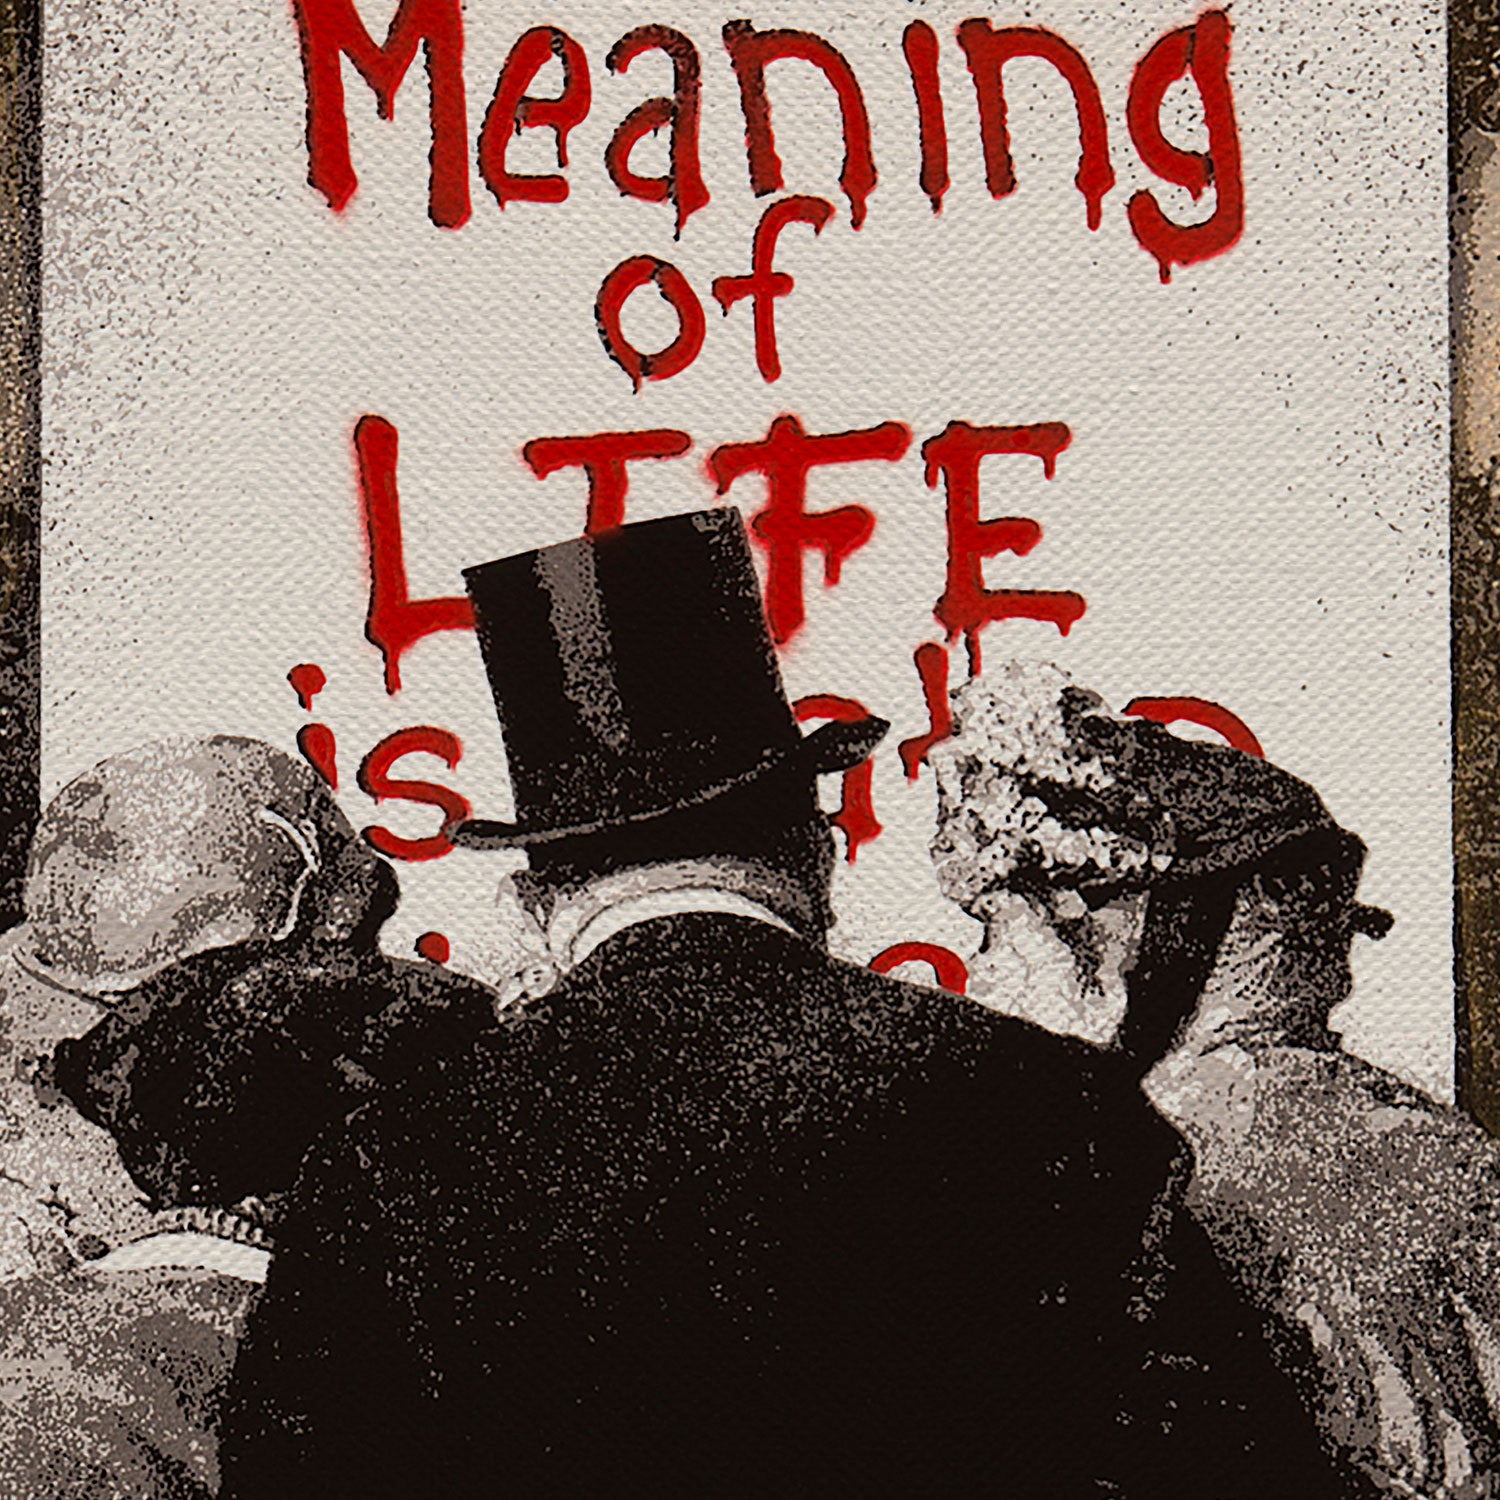 Banksy The Meaning Of Life Wall Art Canvas